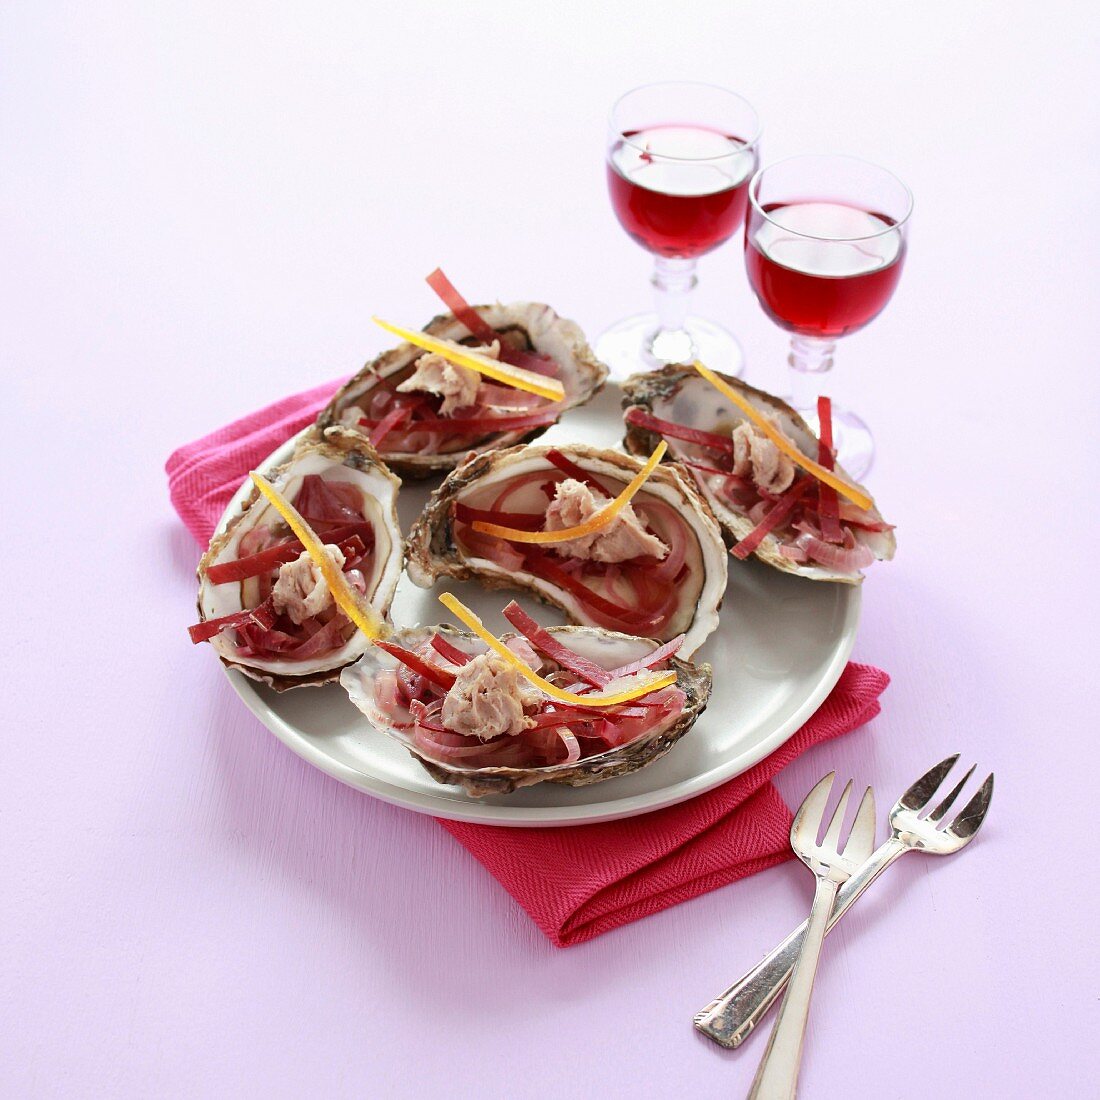 Oysters with thinly sliced bresaola, red onions, confit orange rinds and tuna crumbs